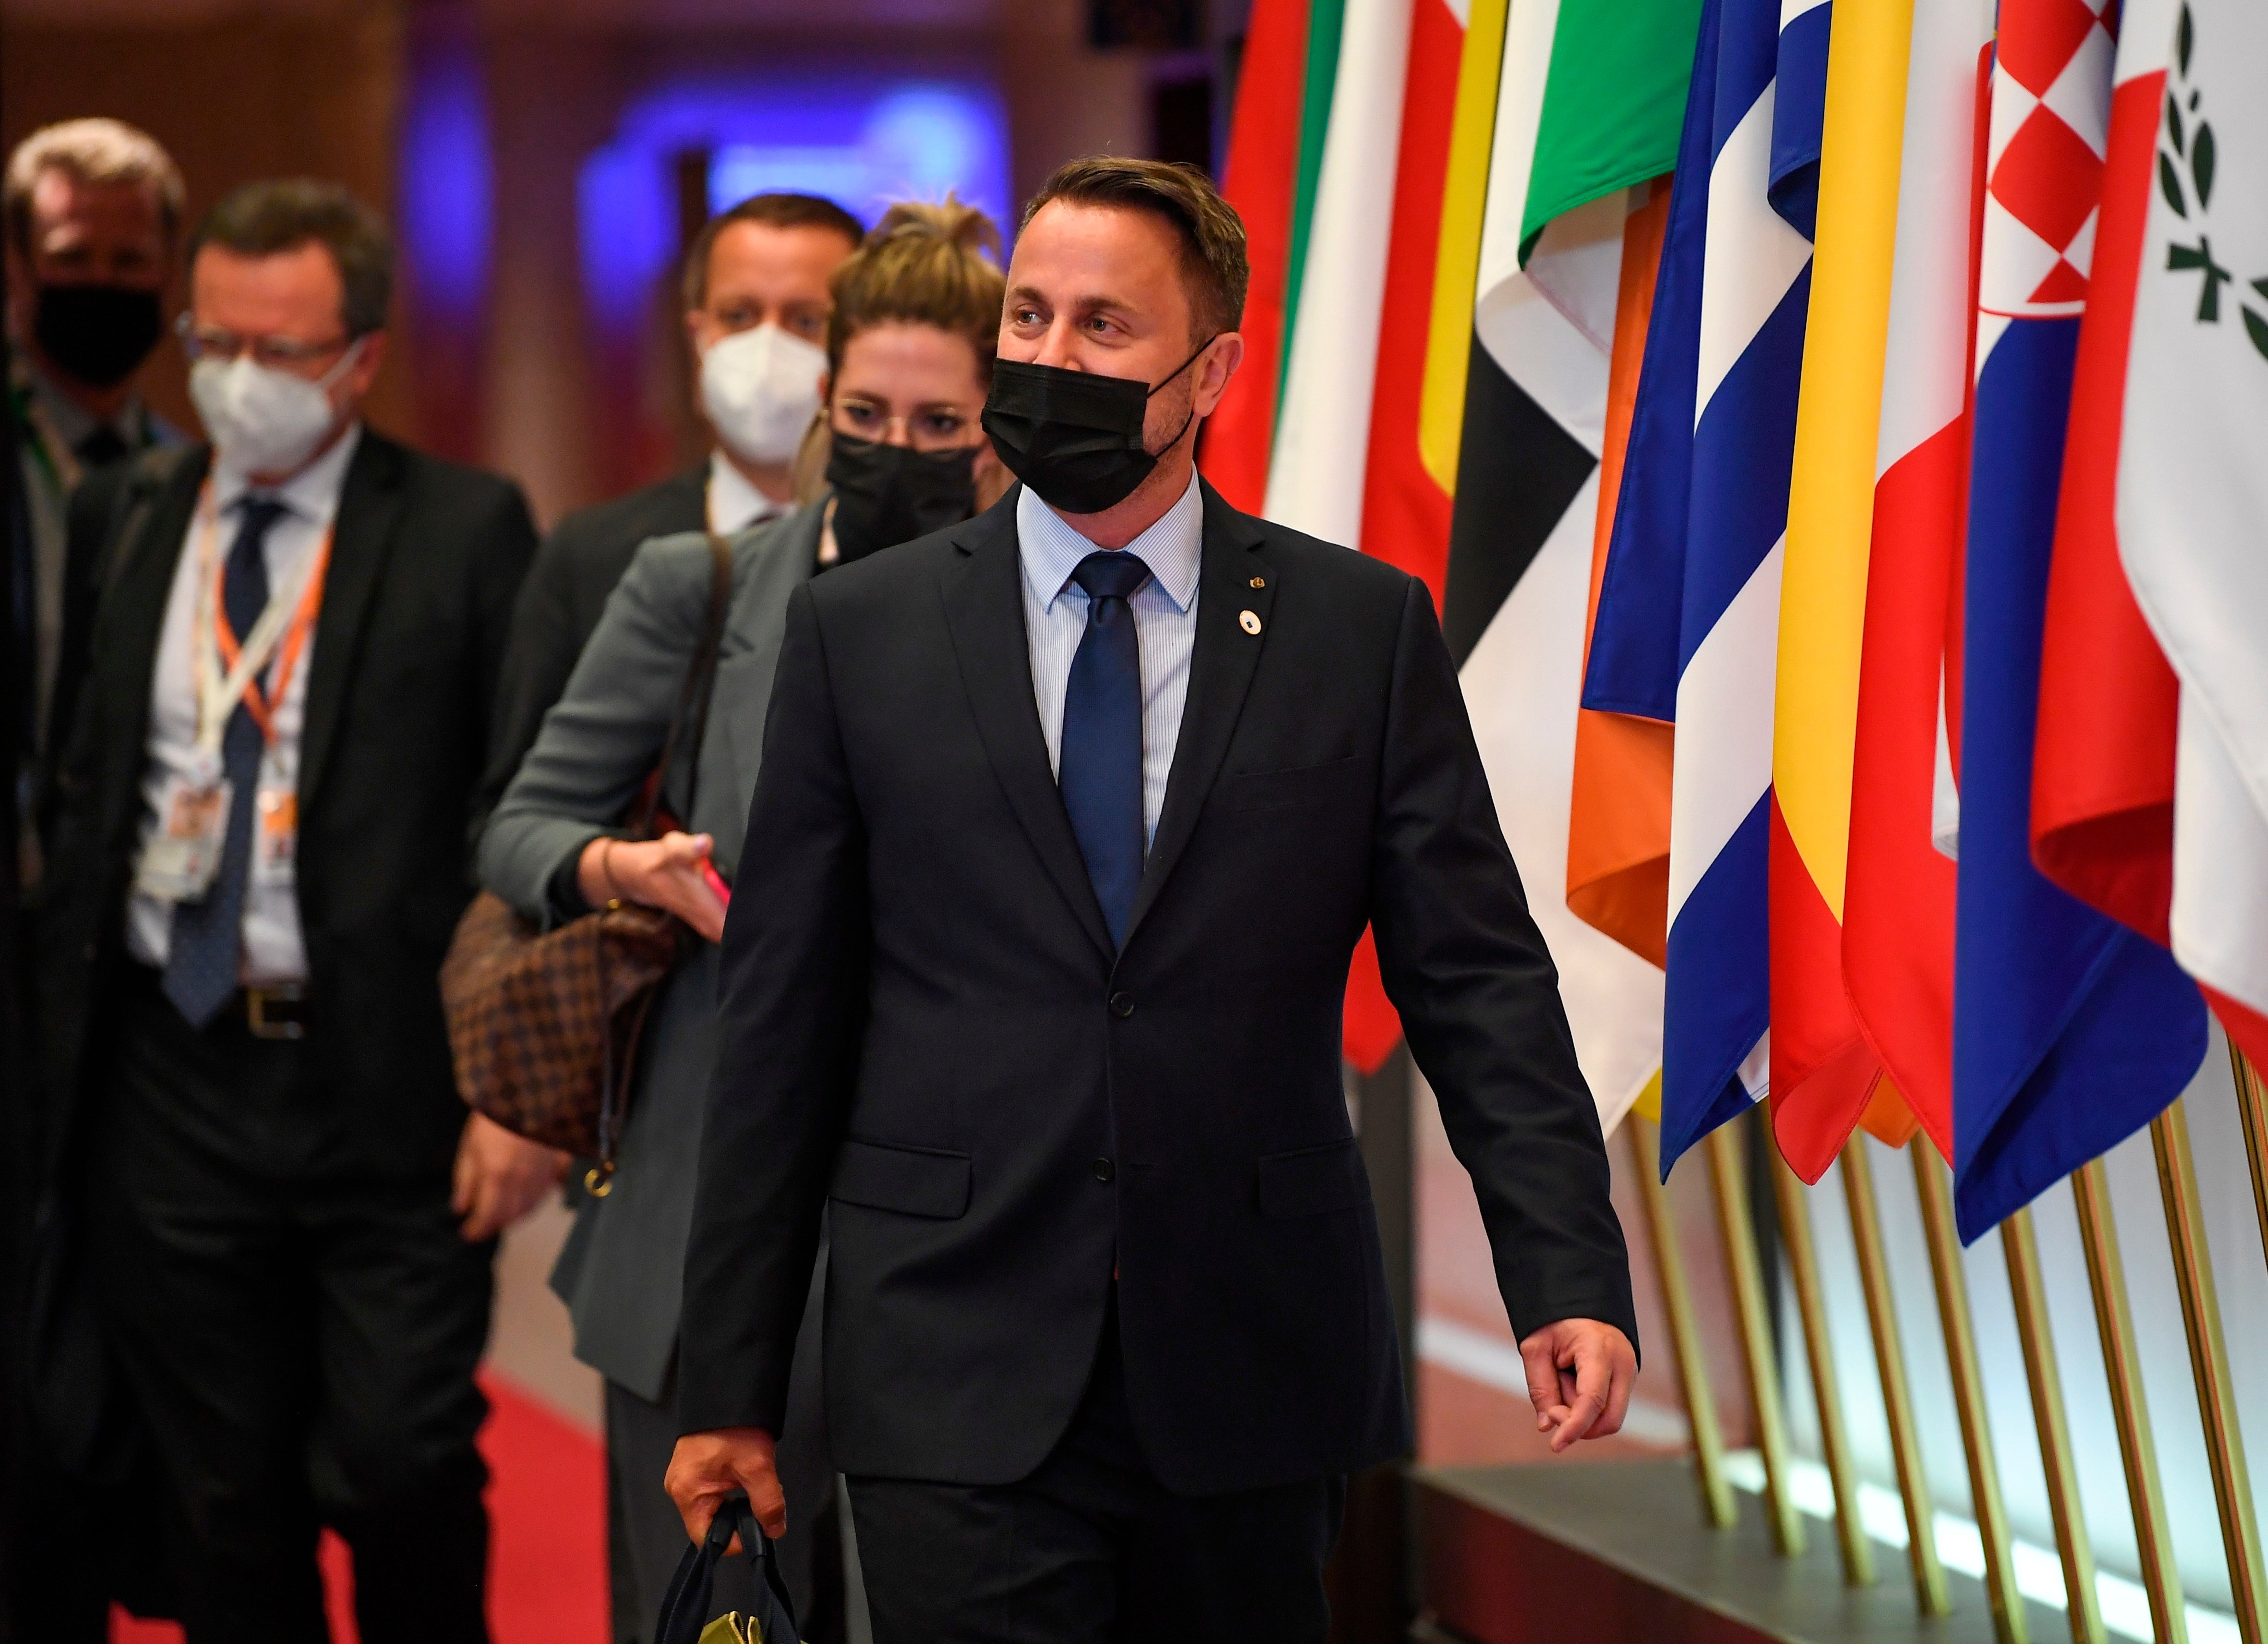 File image: Luxembourg's Prime Minister Xavier Bettel leaves at the end of an EU summit at the European Council building in Brussels, Friday, 25 June, 2021